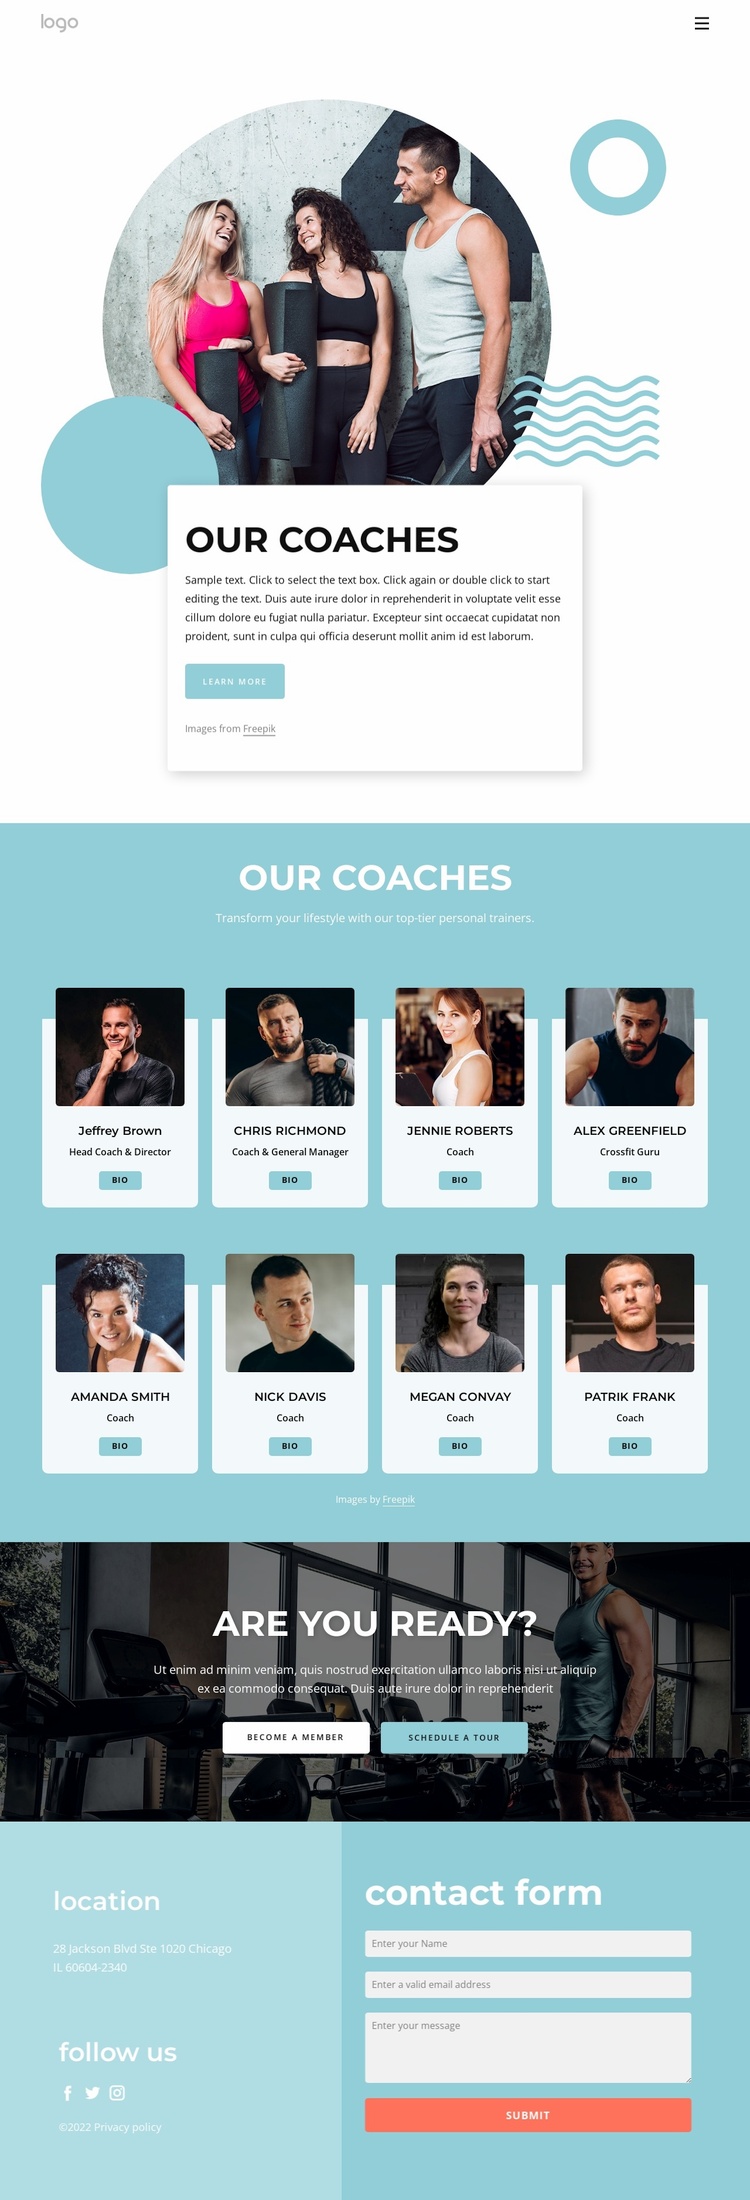 Our Coaches Website Template